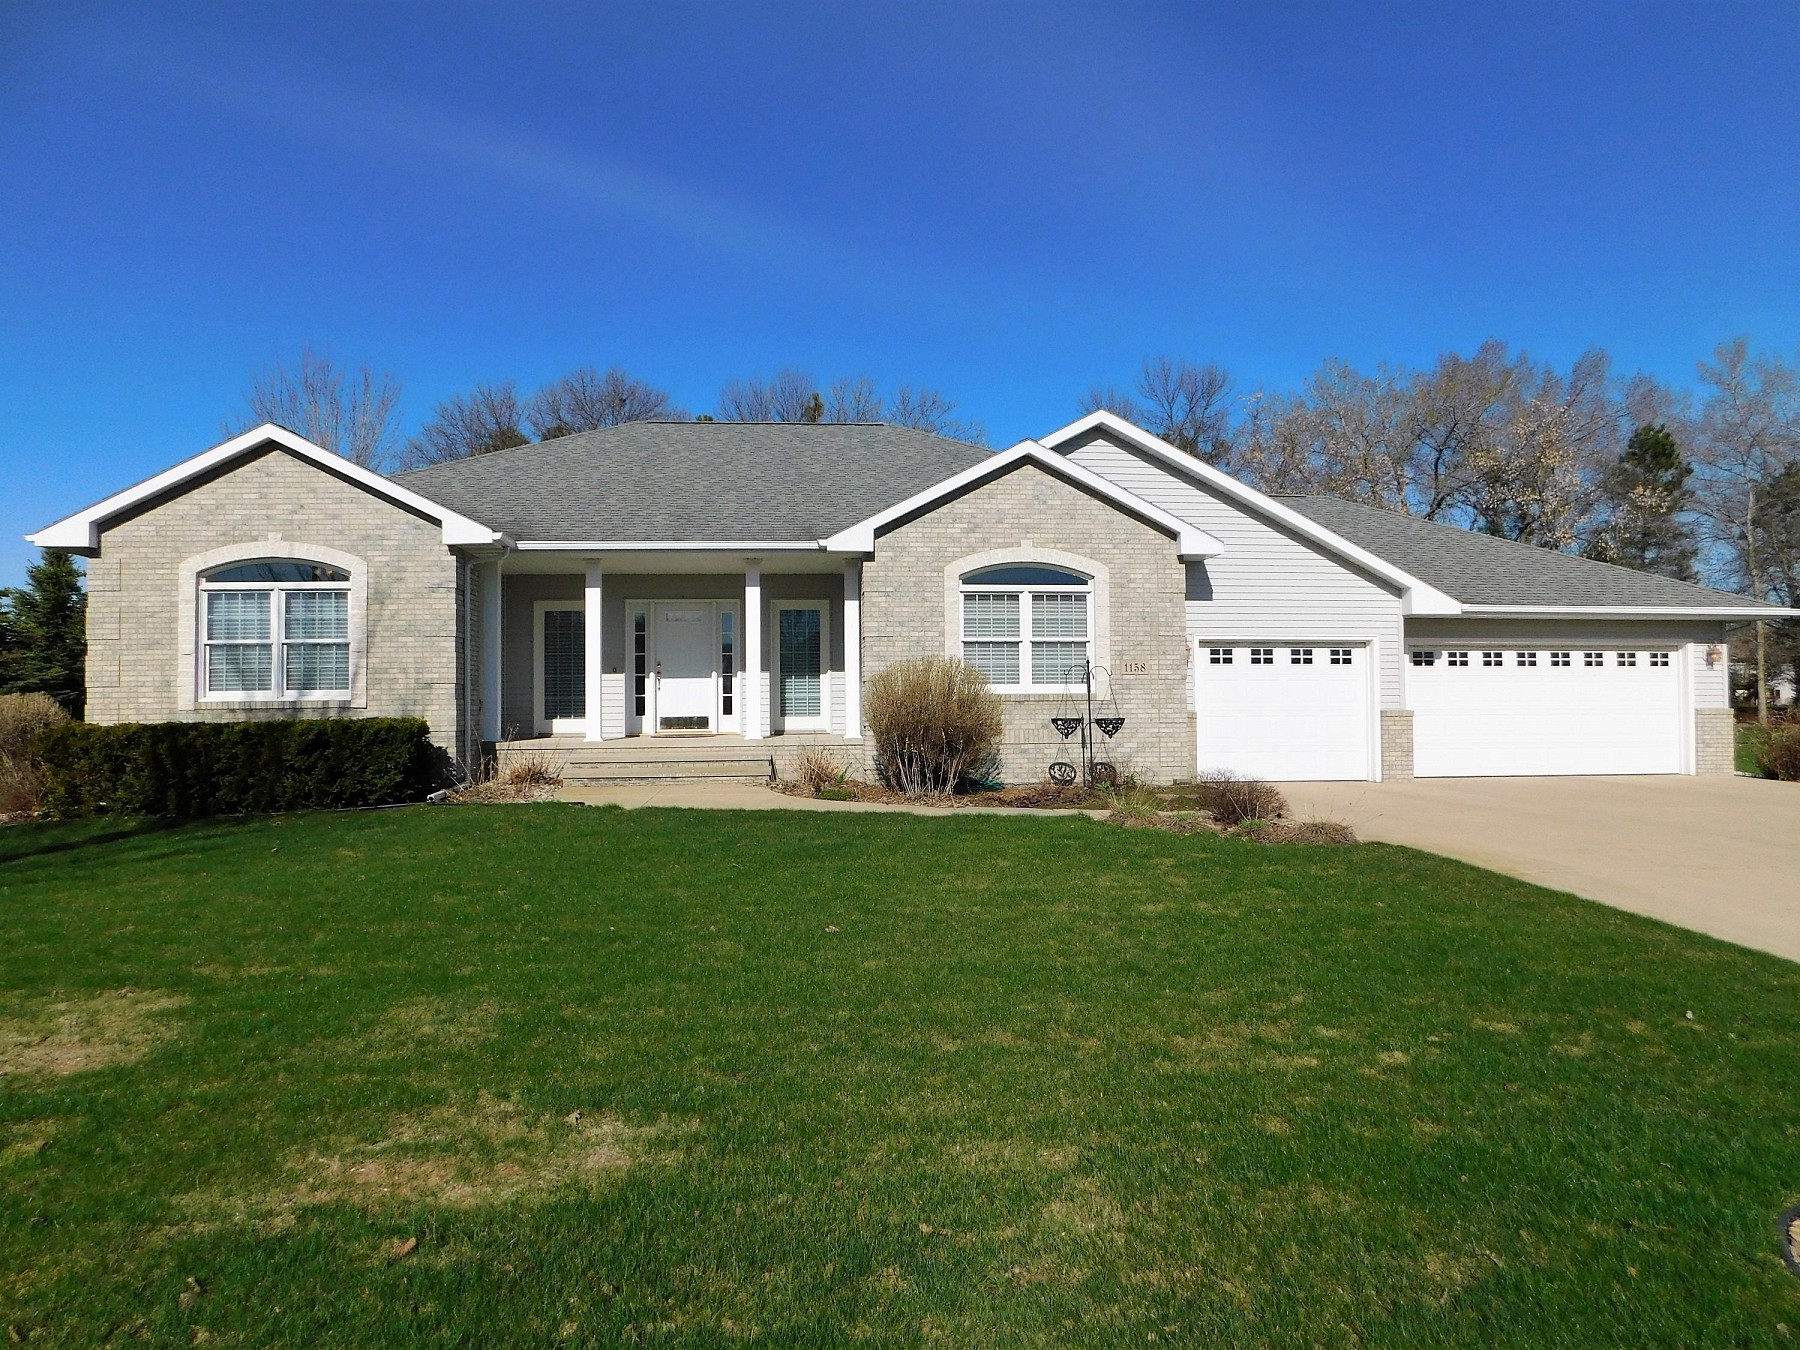 1158 Indian Hills Road, Brookings, SD 57006